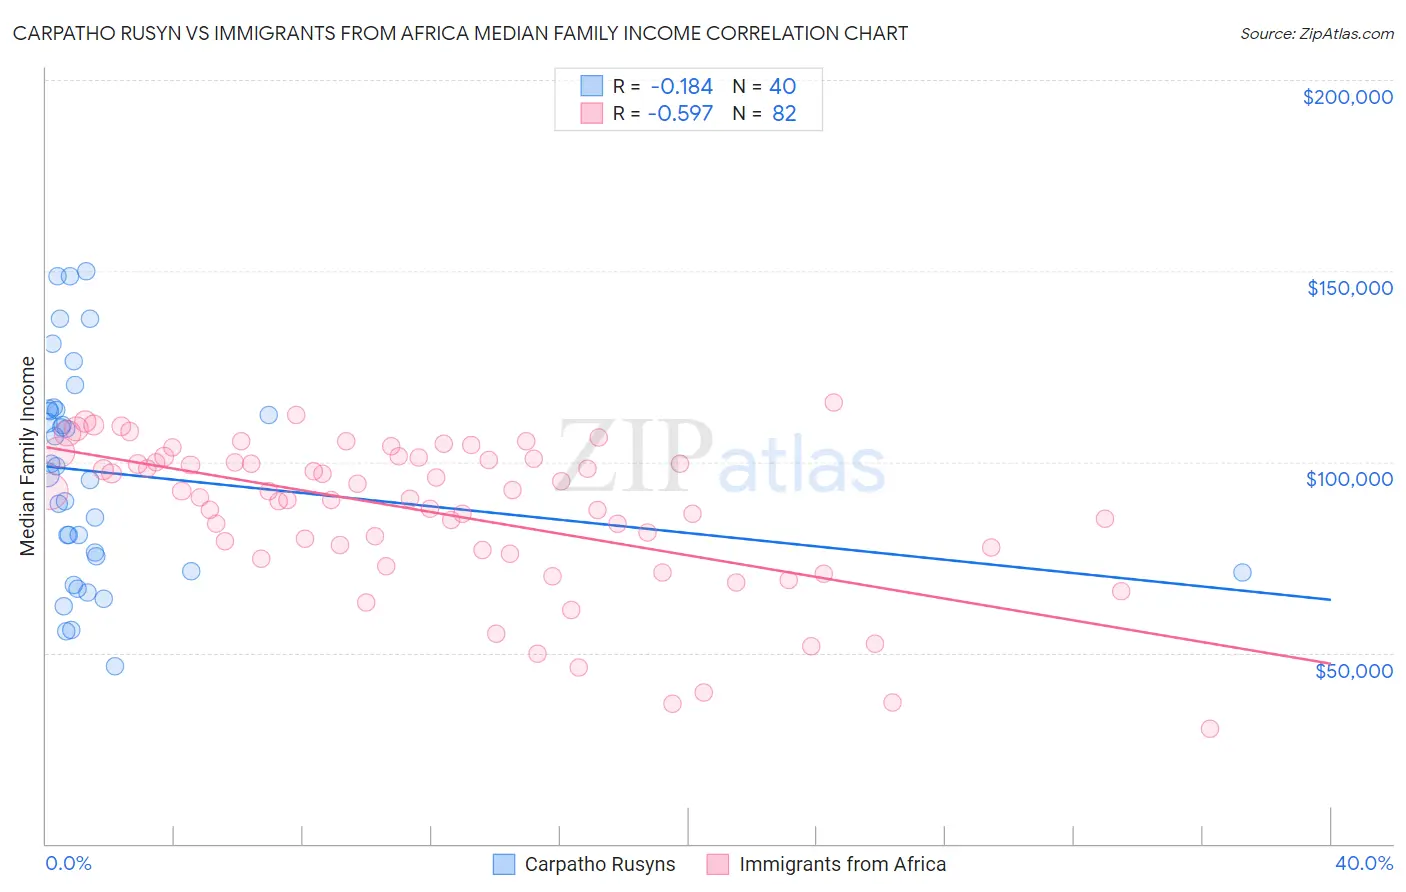 Carpatho Rusyn vs Immigrants from Africa Median Family Income